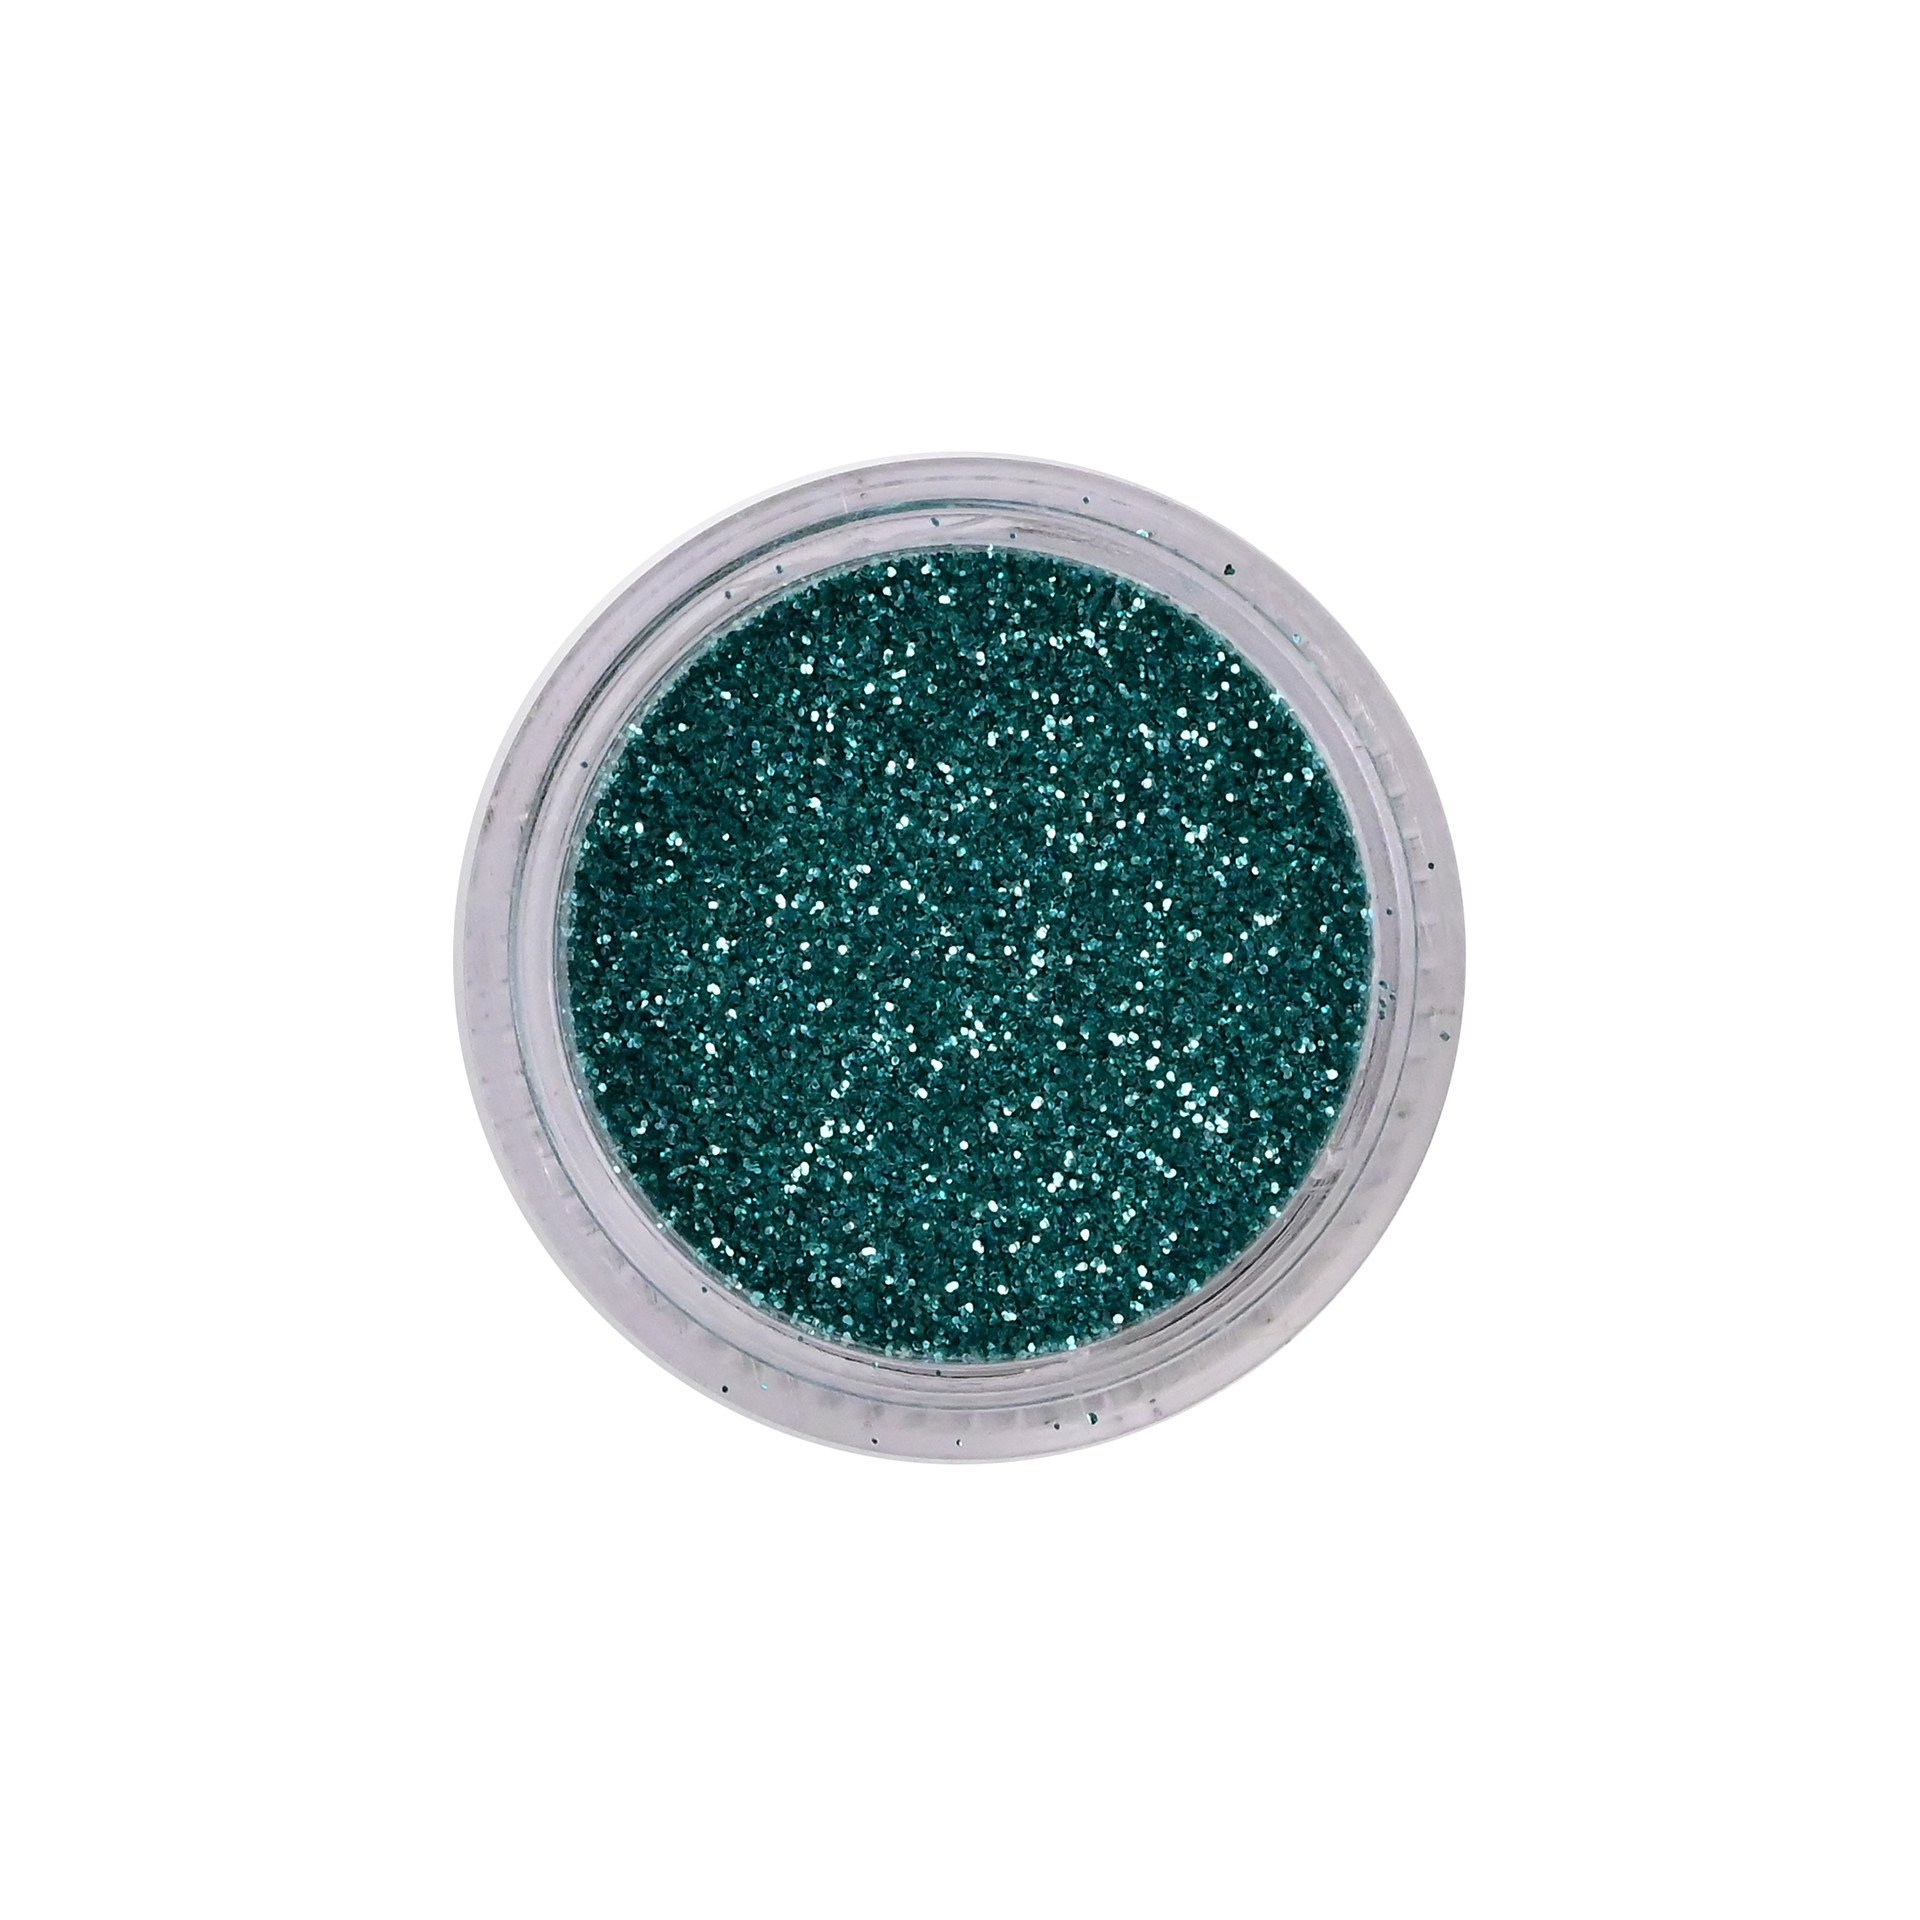 Petites Paillettes Turquoises Pure Glitter packaging